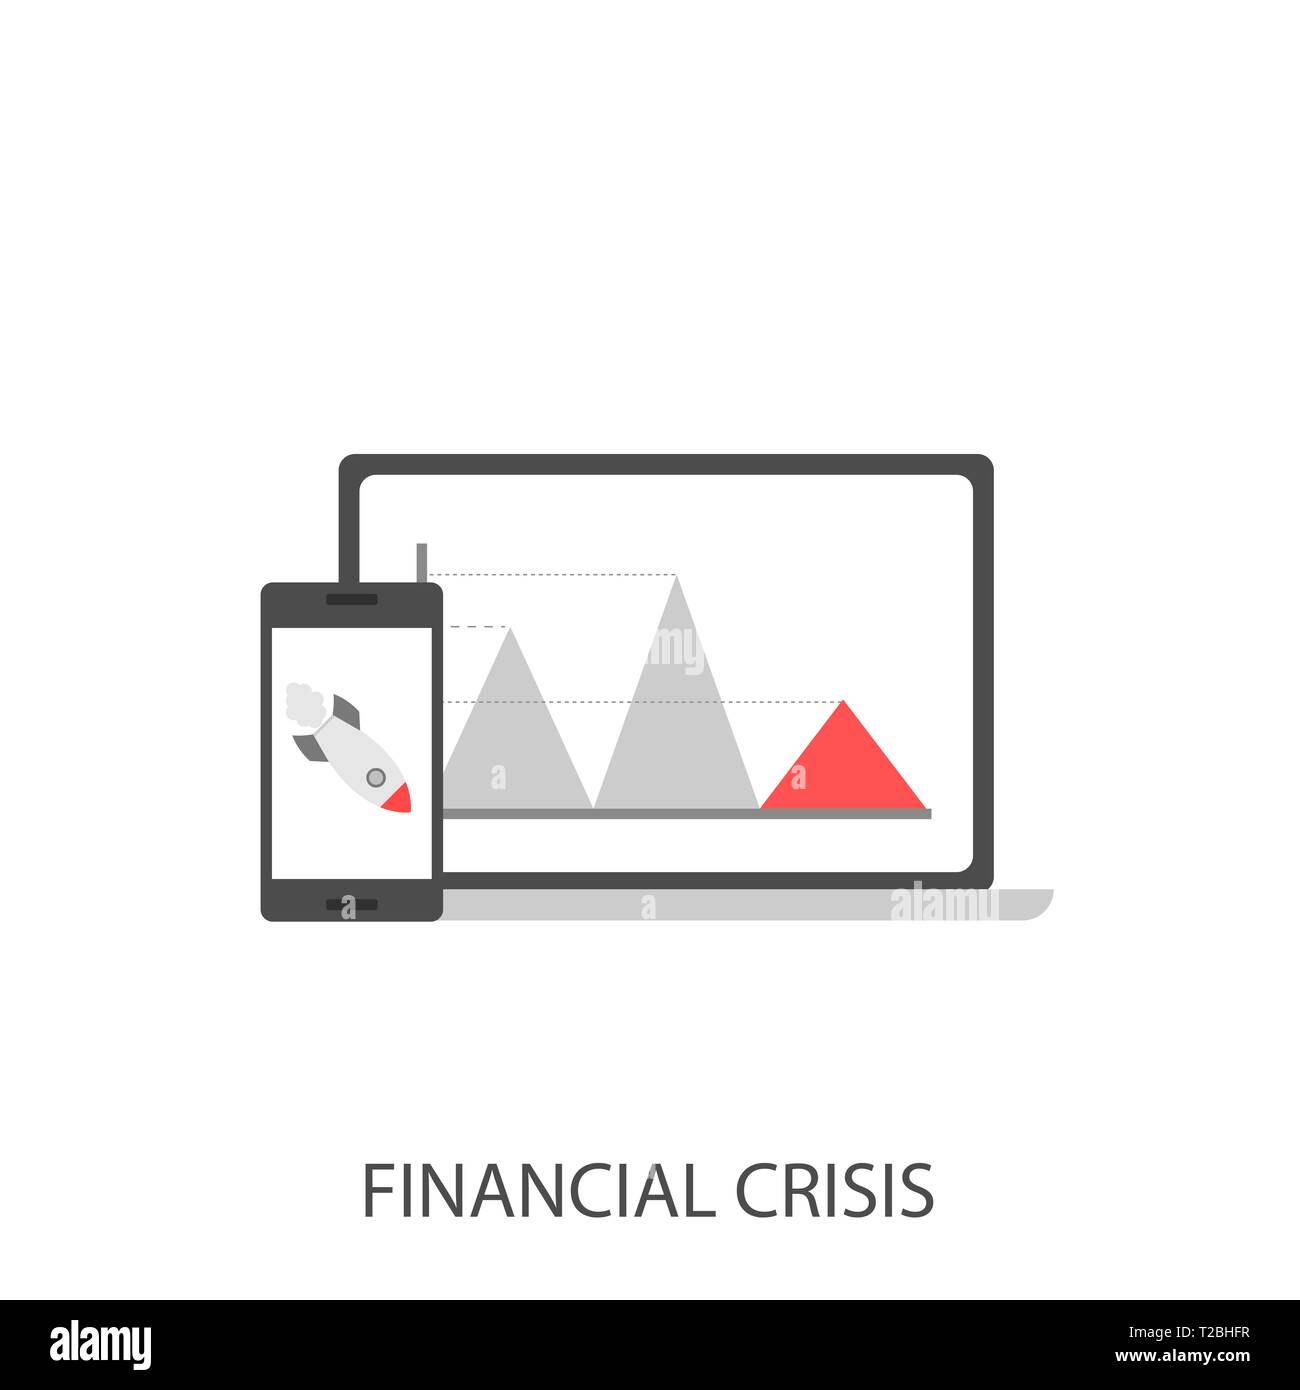 Financial crisis. Business crisis concept, red arrow sign graph, falling rocket, phone and laptop Vector illustration Stock Vector